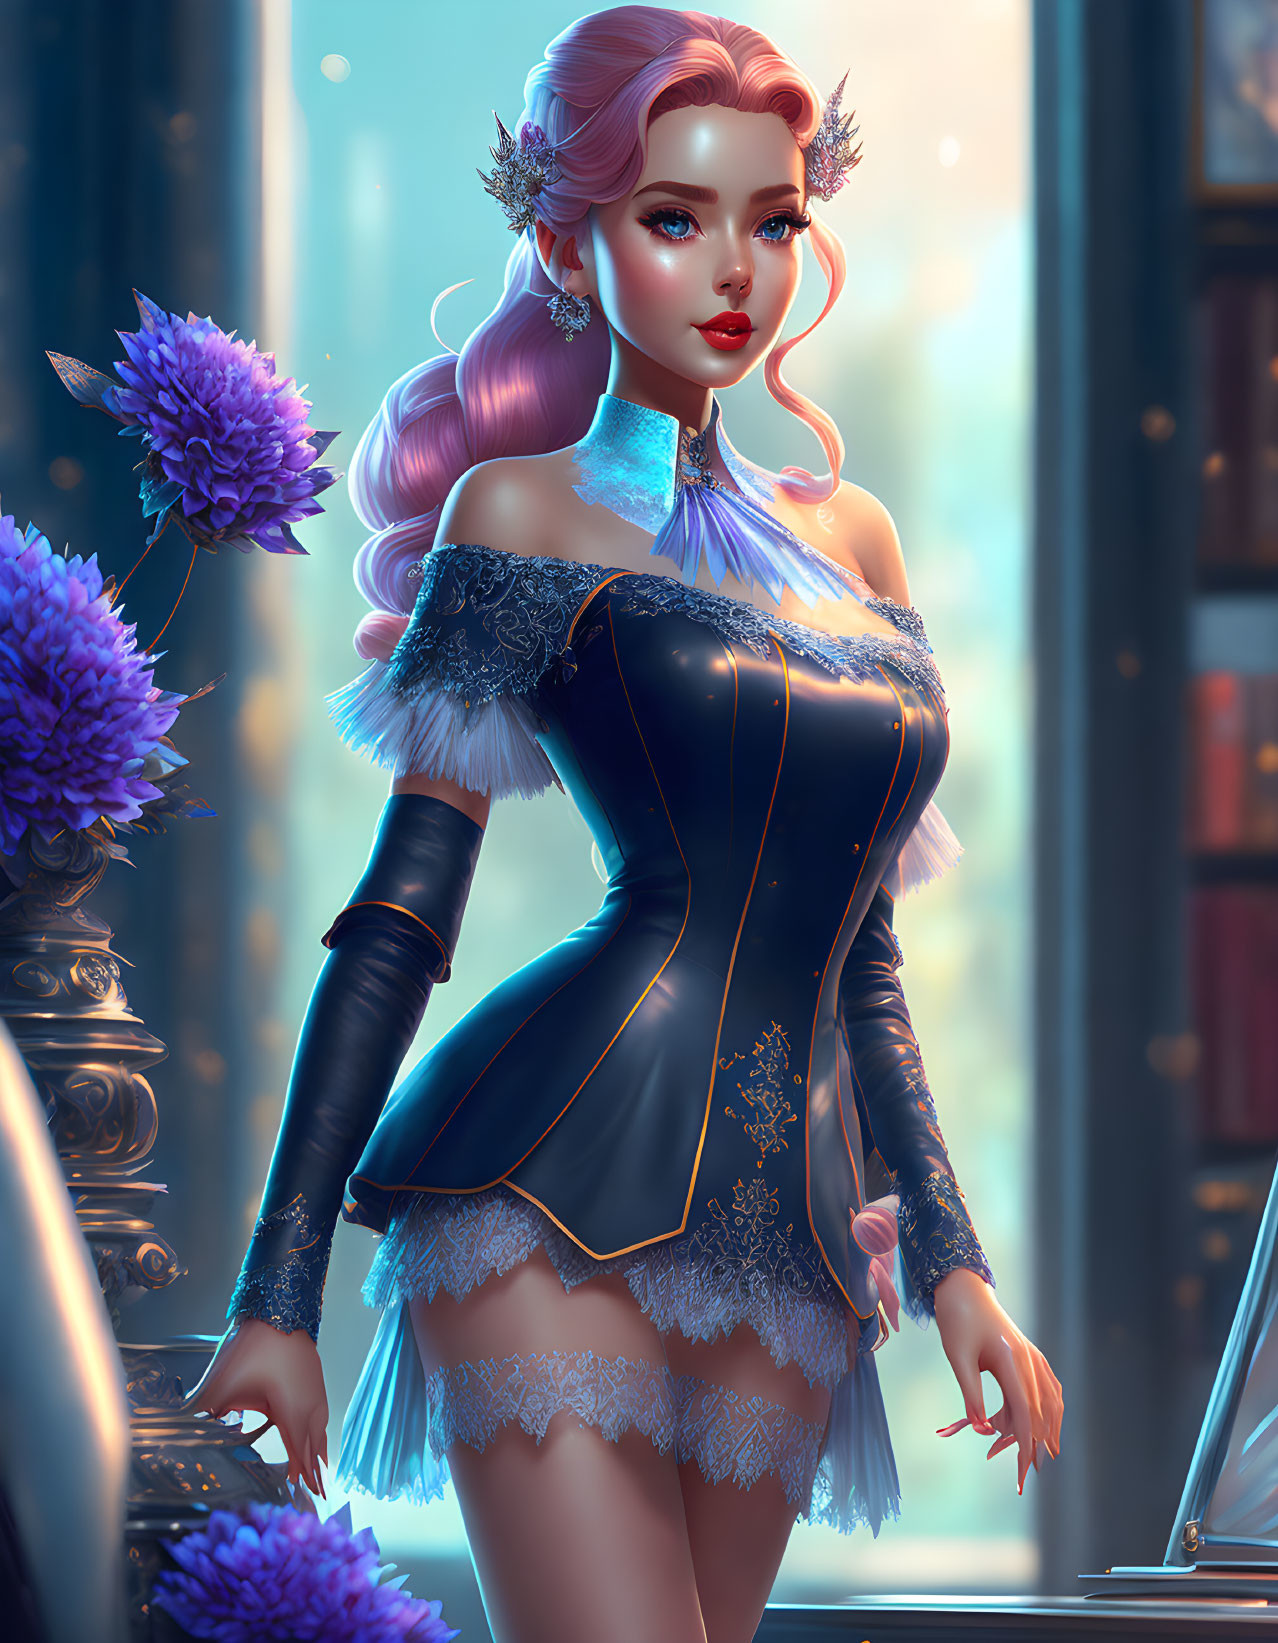 Illustrated woman with pink hair in detailed corset beside purple flowers